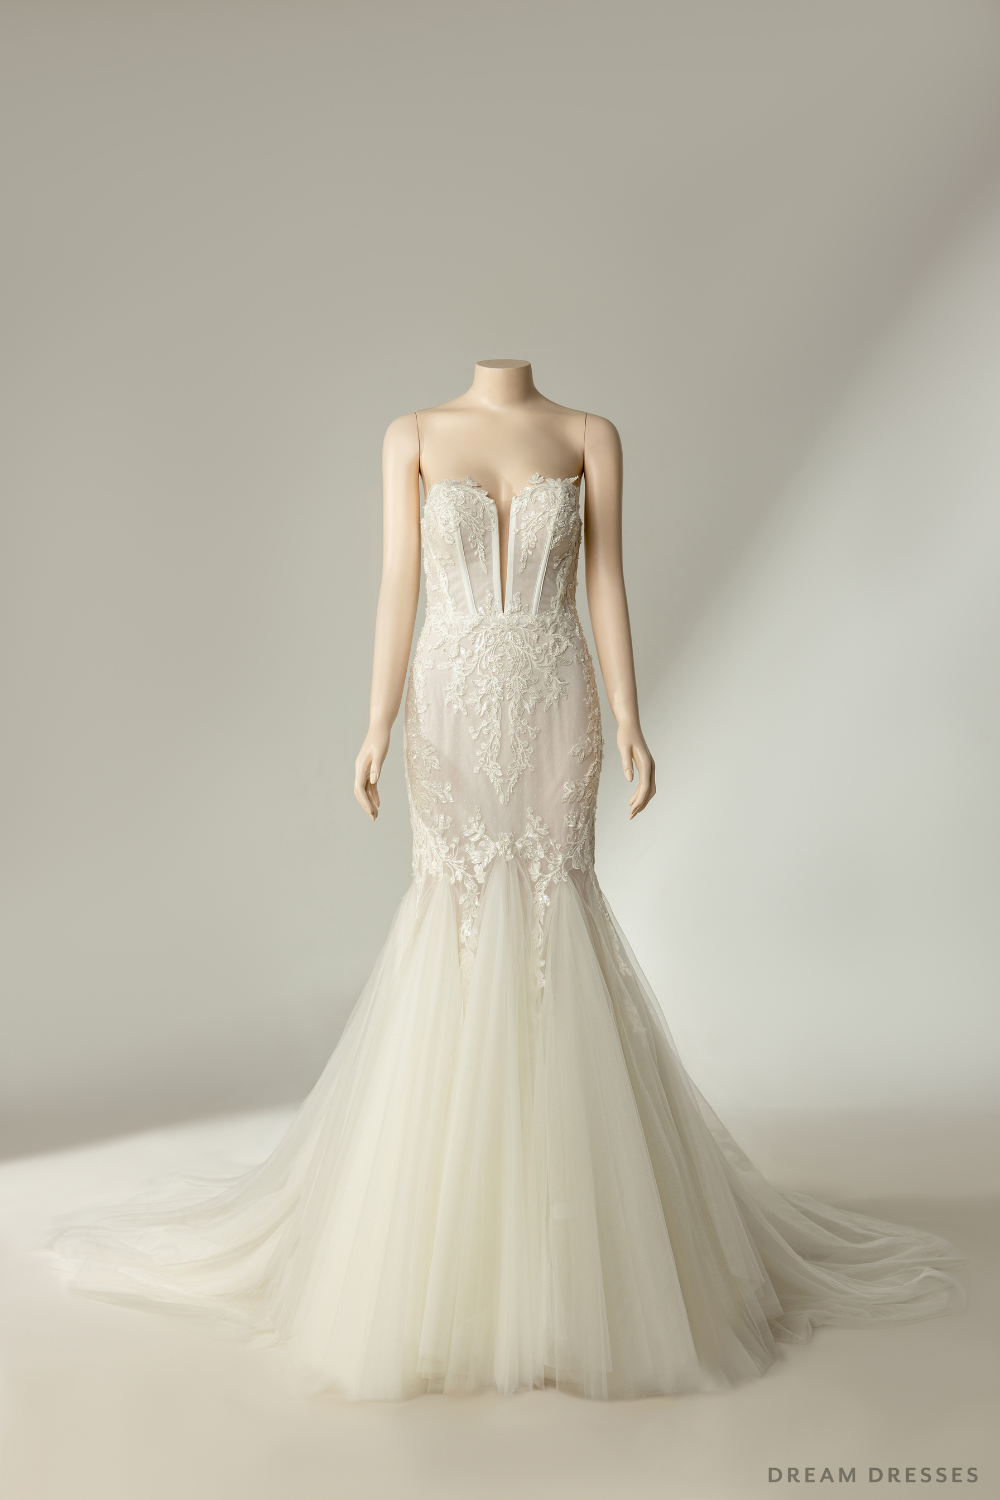 Couture Mermaid Wedding Dress with Sheer Back (#CALISTA)